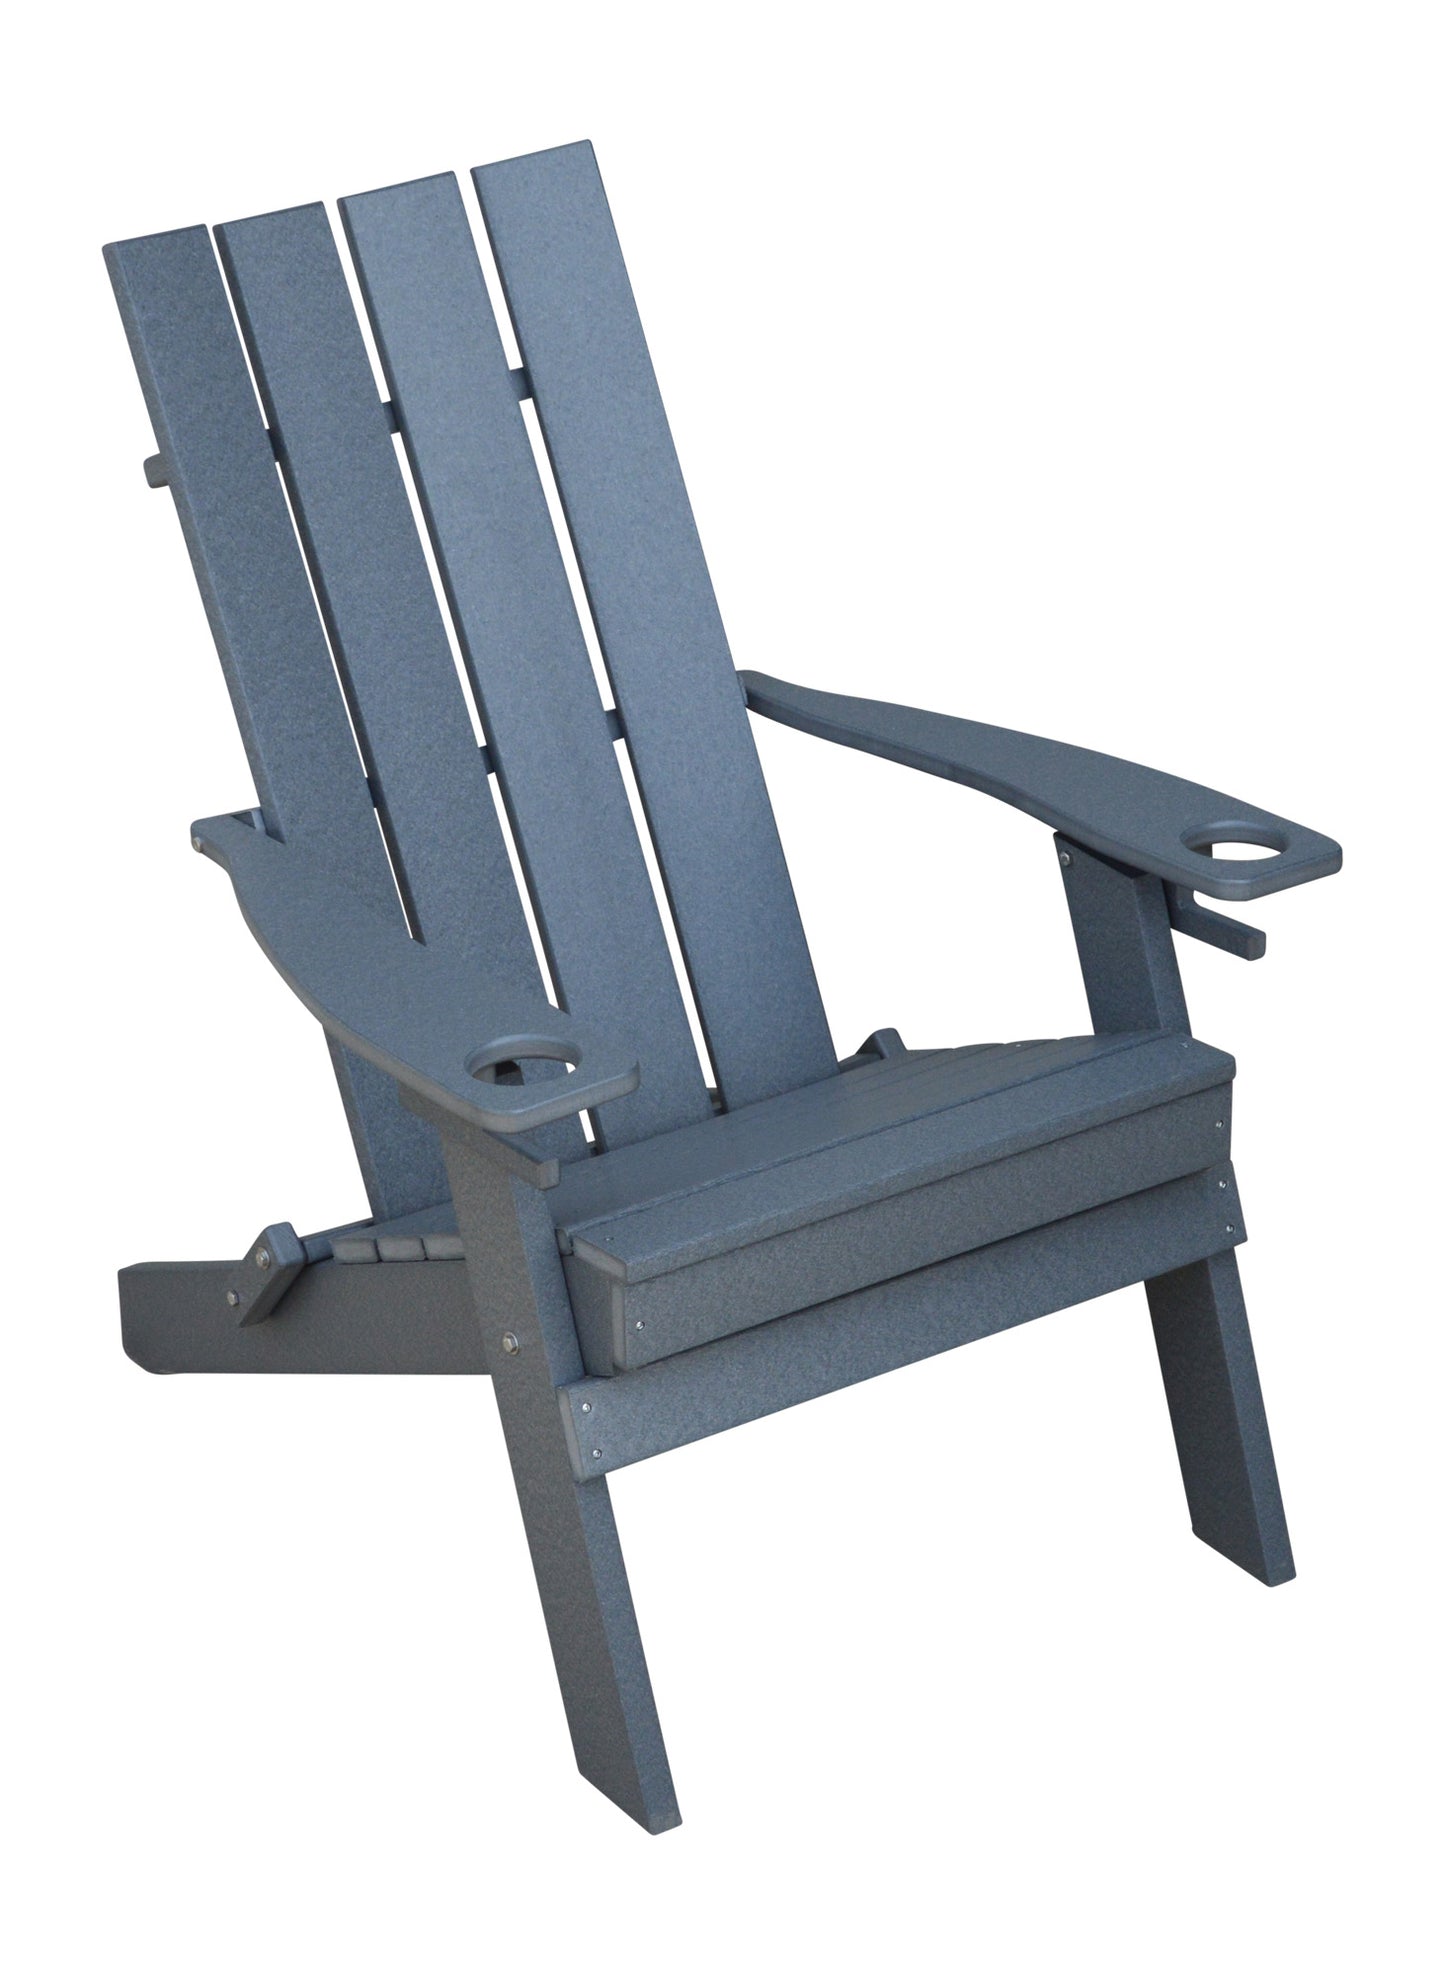 A&L Furniture Co. Amish Made Poly Hampton Folding Adirondack Chair w/2 cupholders - LEAD TIME TO SHIP 10 BUSINESS DAYS